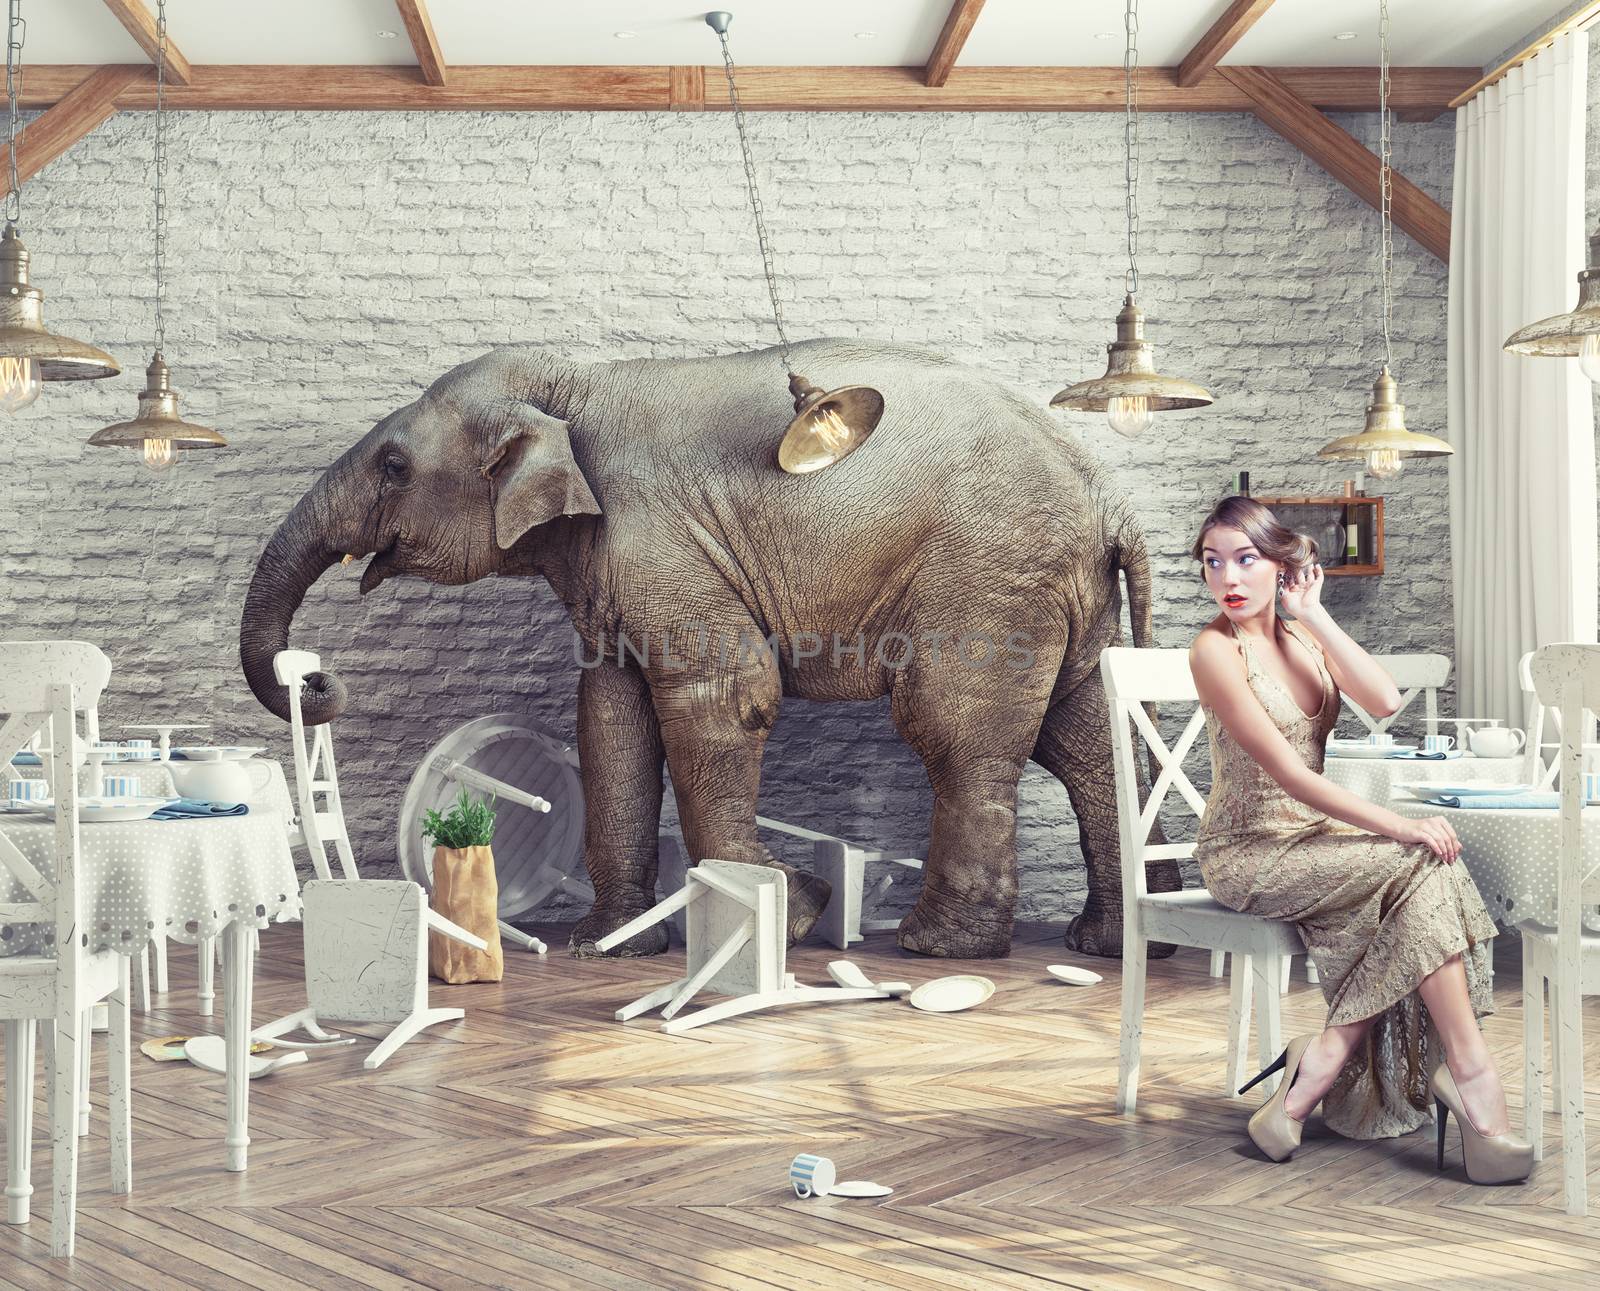  elephant  in  restaurant by vicnt